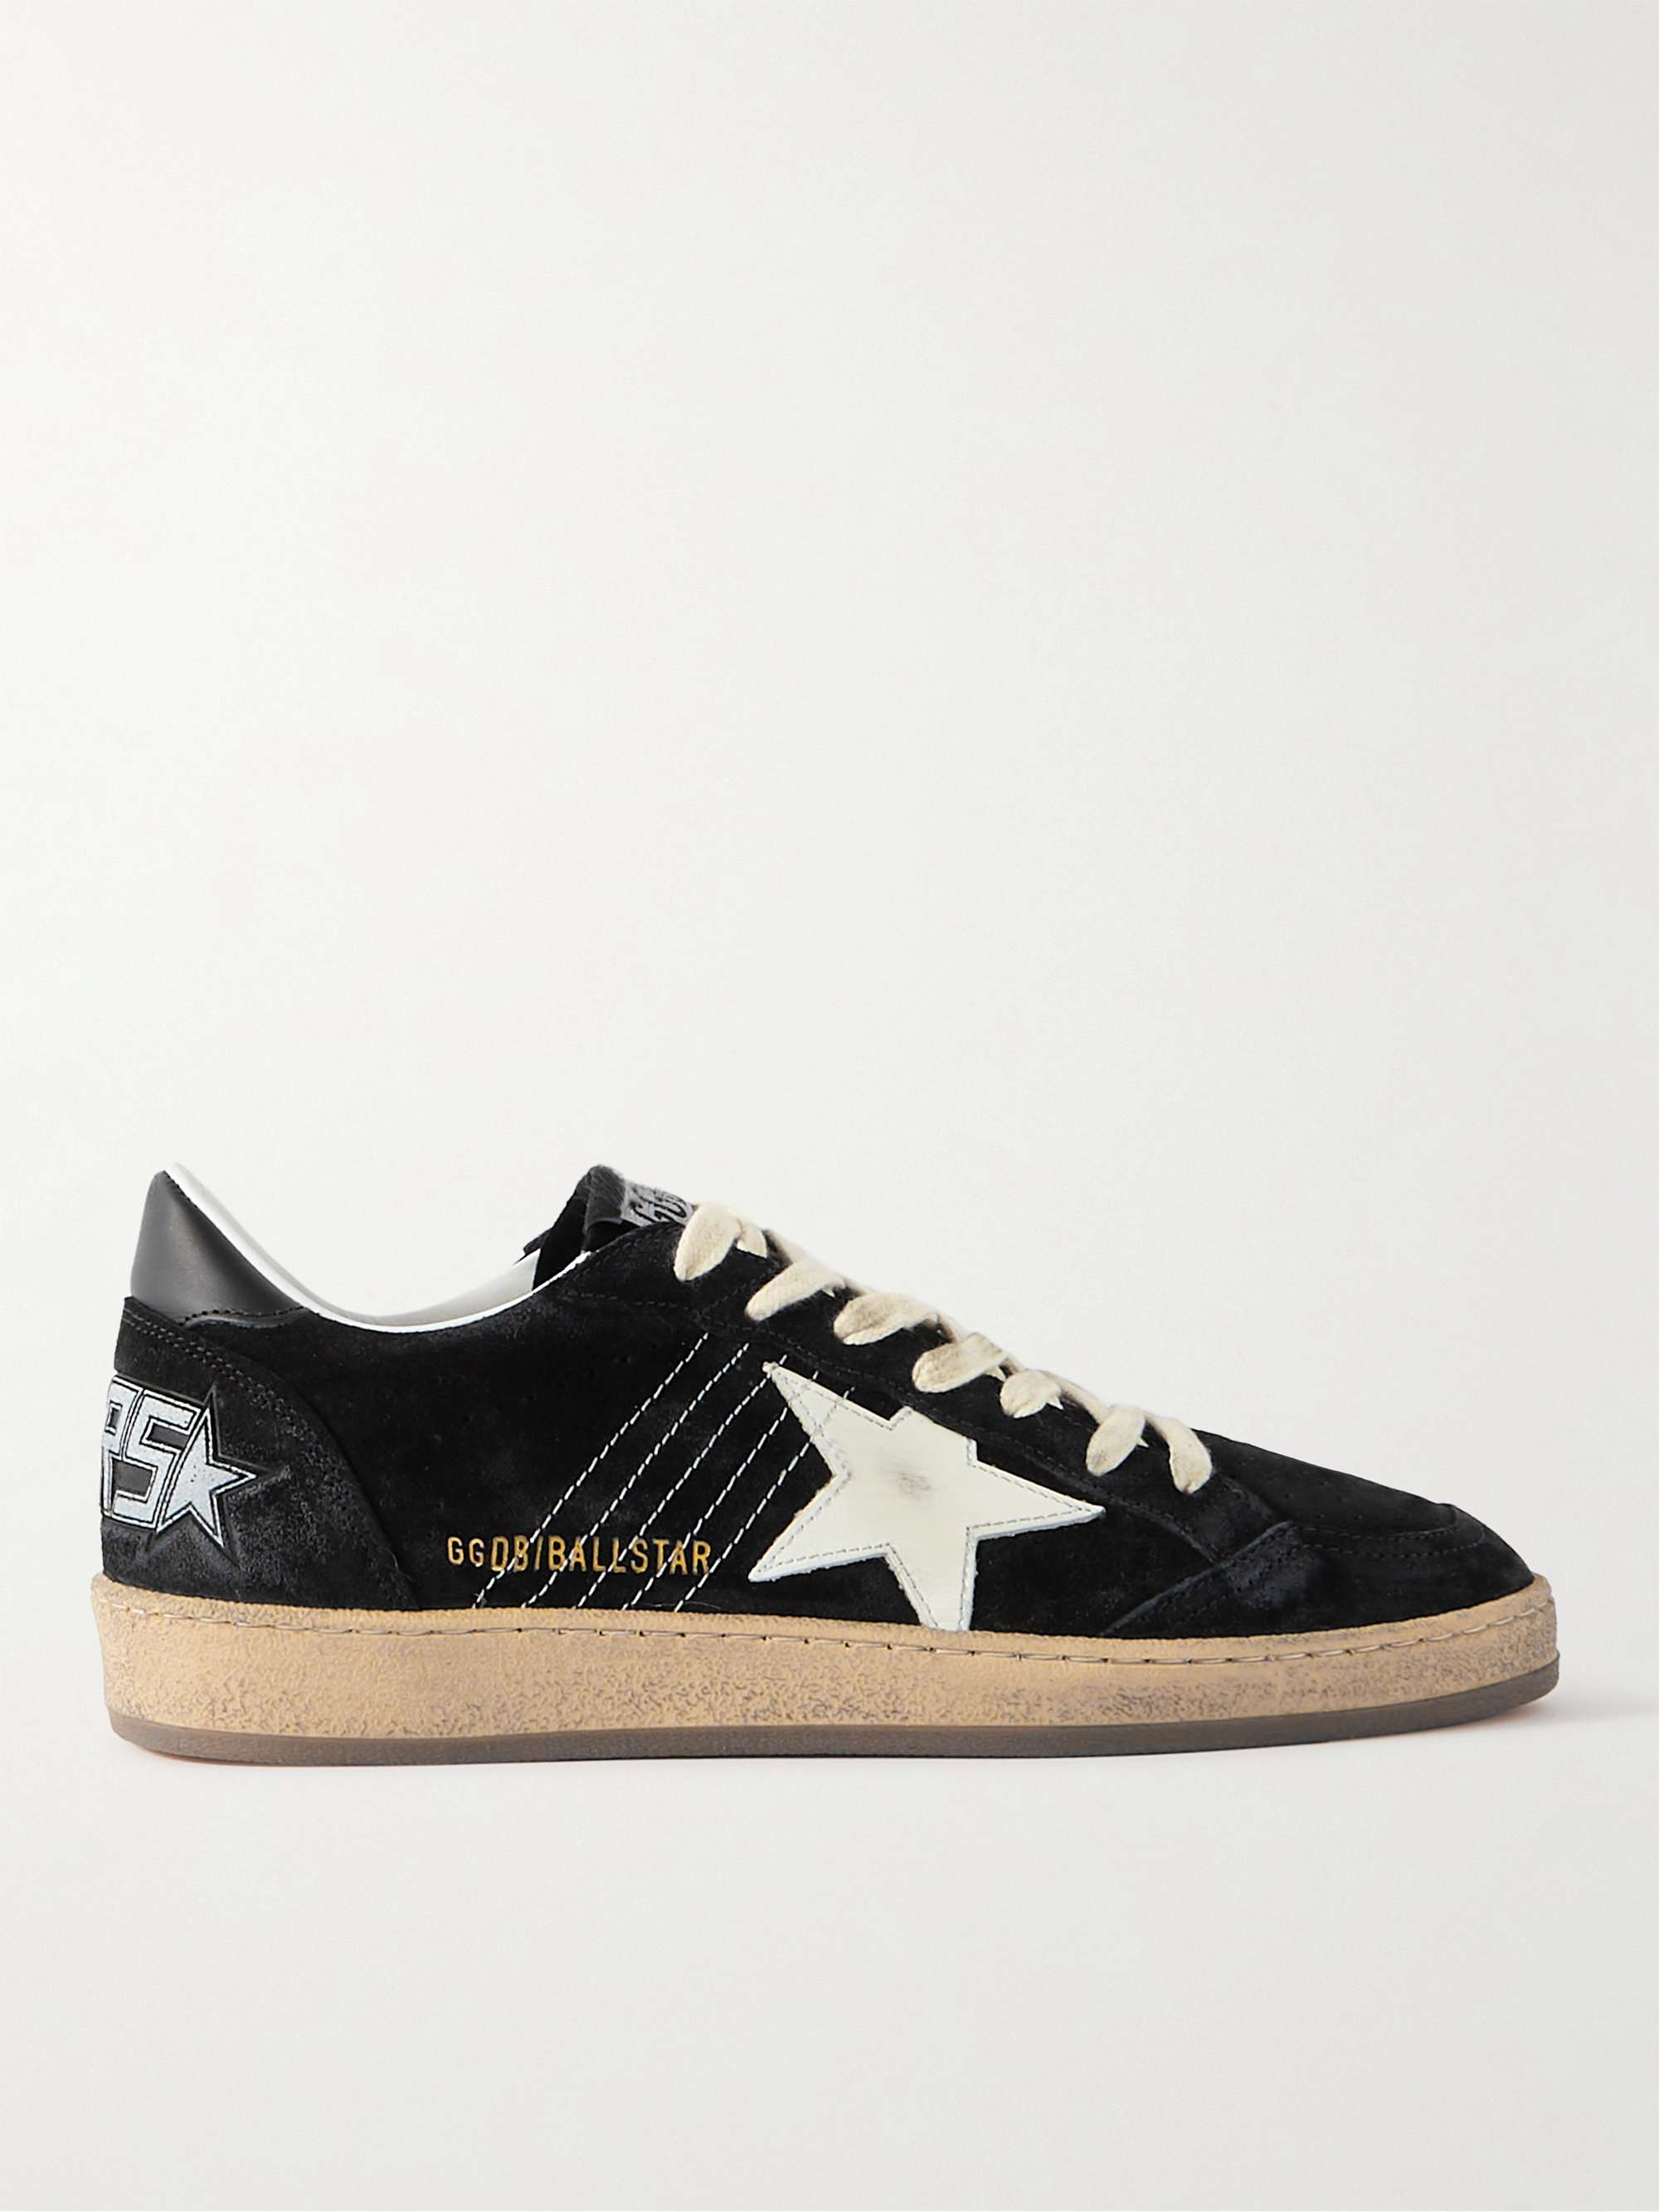 Black Ball Star Distressed Suede and Leather Sneakers | GOLDEN GOOSE | MR  PORTER